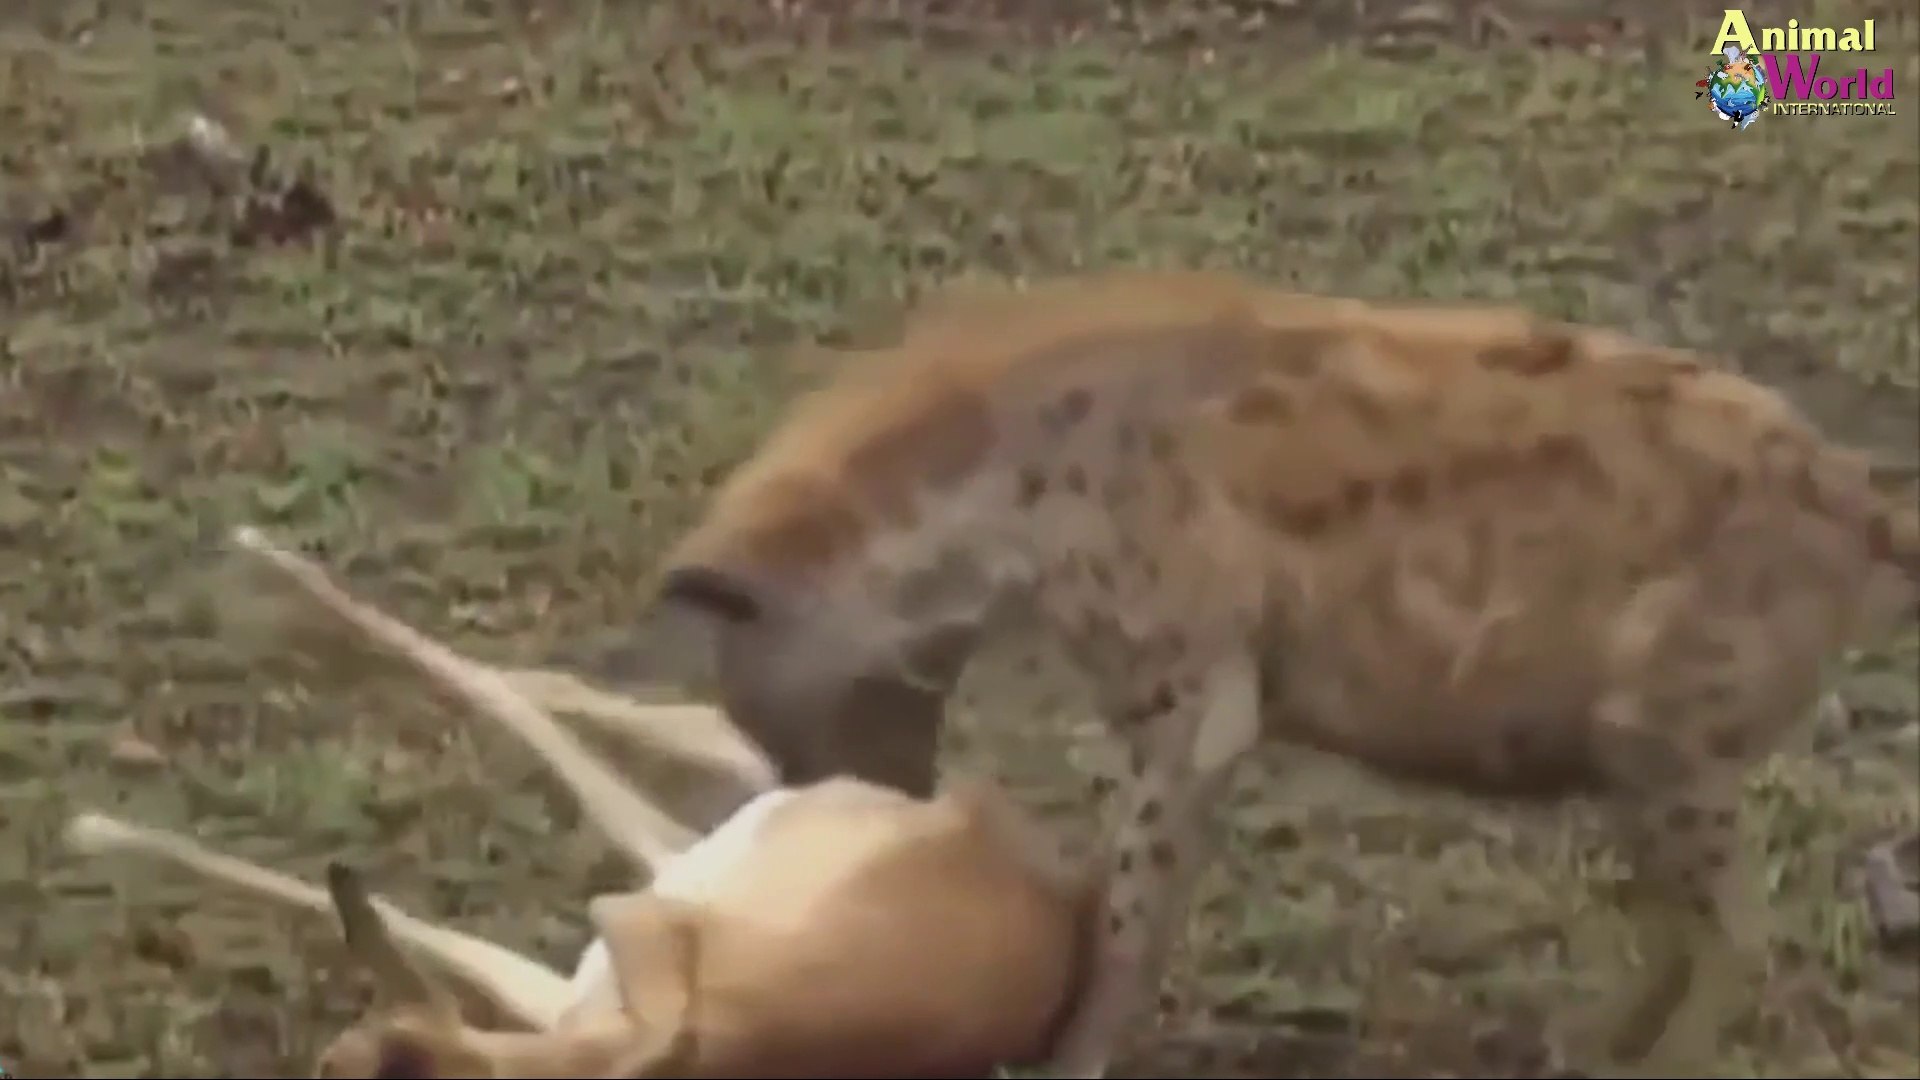 OMG! Gorillas Old too strong, Gorillas Rescue Antelope From Cheetah hunting, Antelope lucky escape